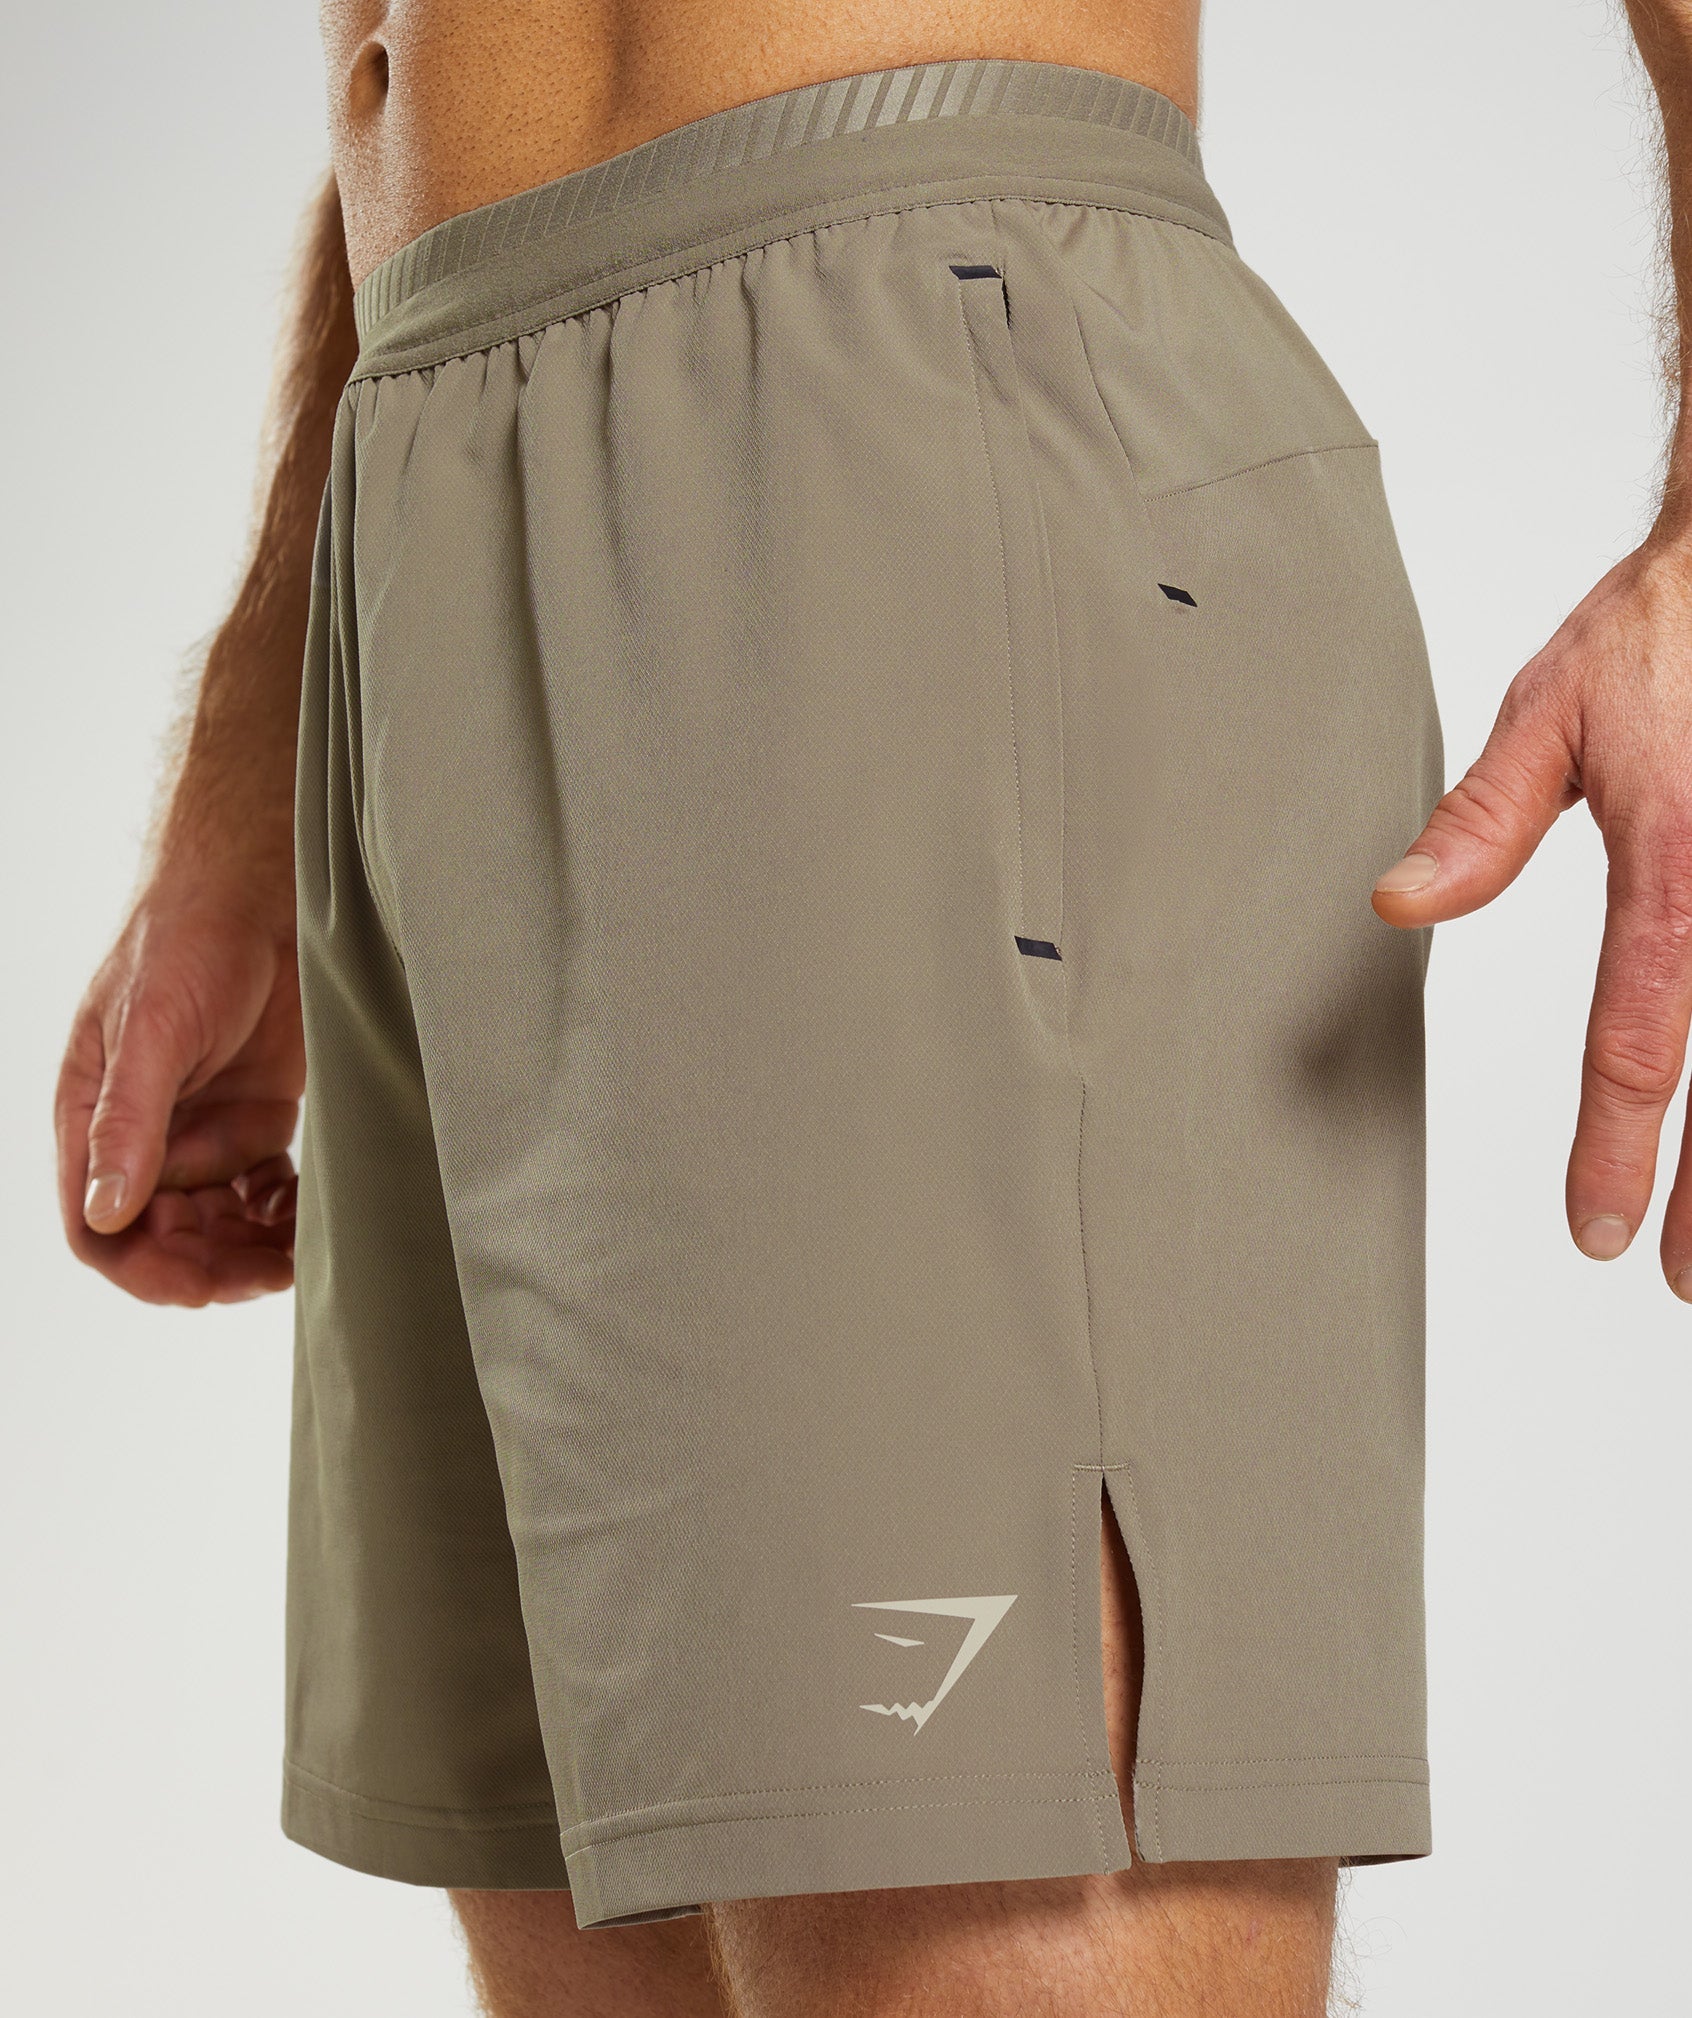 Apex 7" Hybrid Shorts in Earthy Brown - view 5